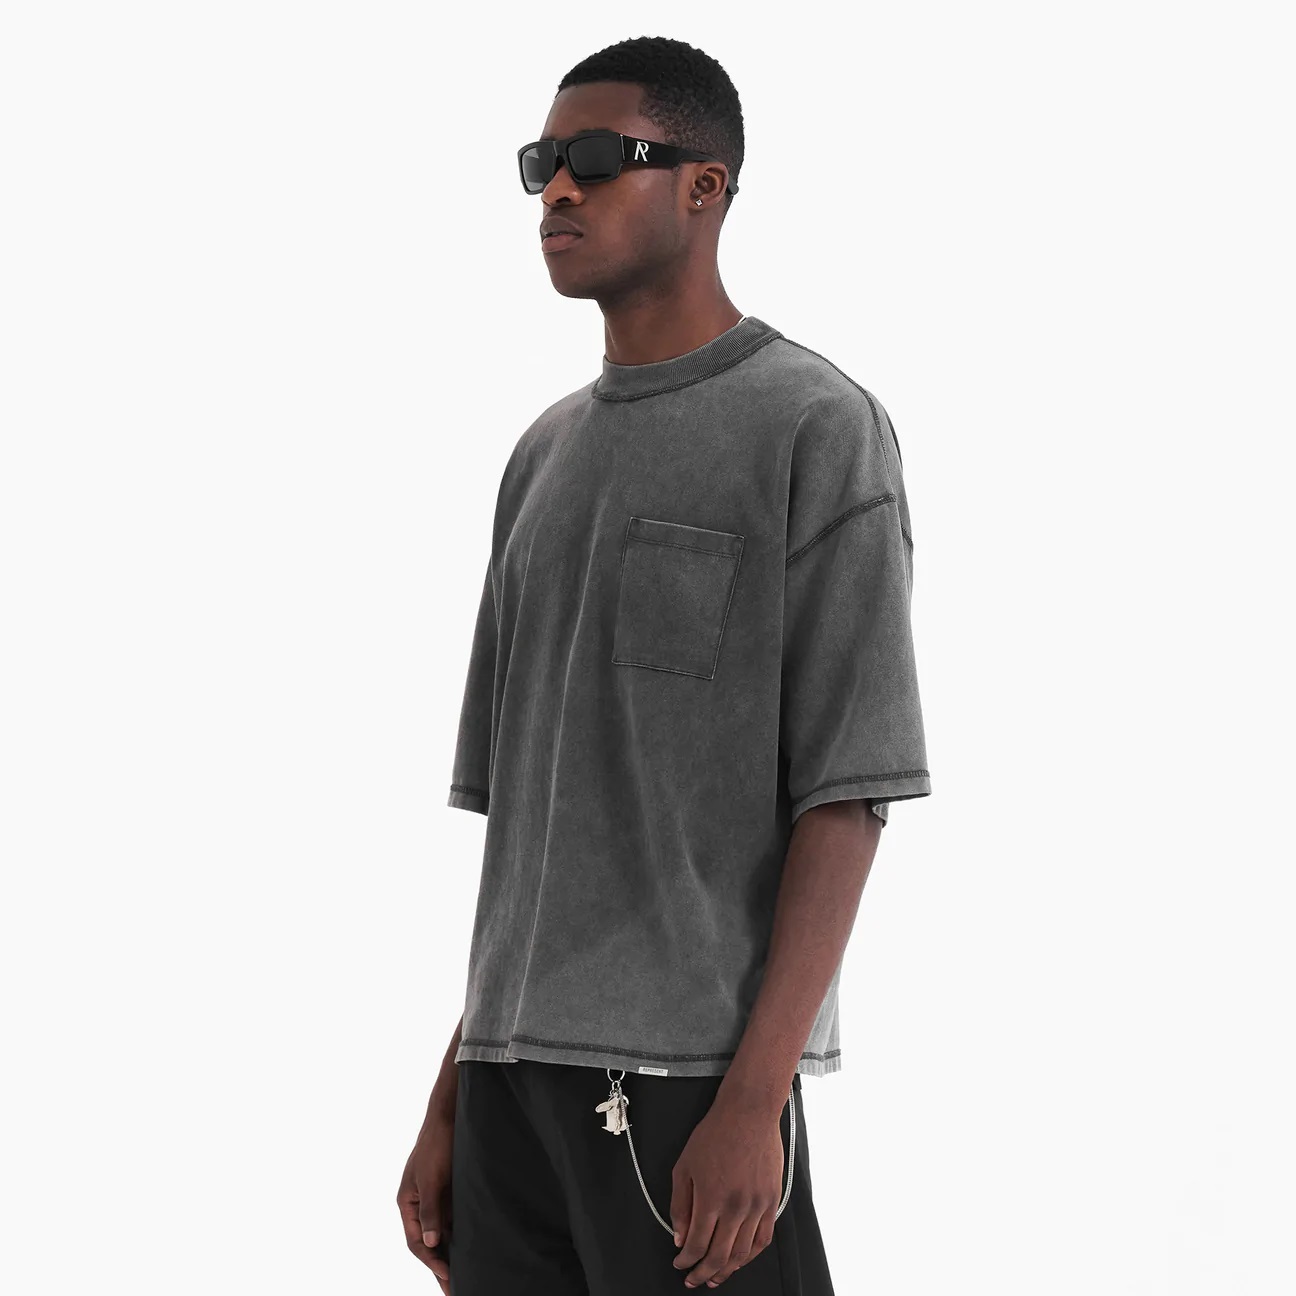 Represent Heavyweight Pocket T-Shirt in Vintage Grey S